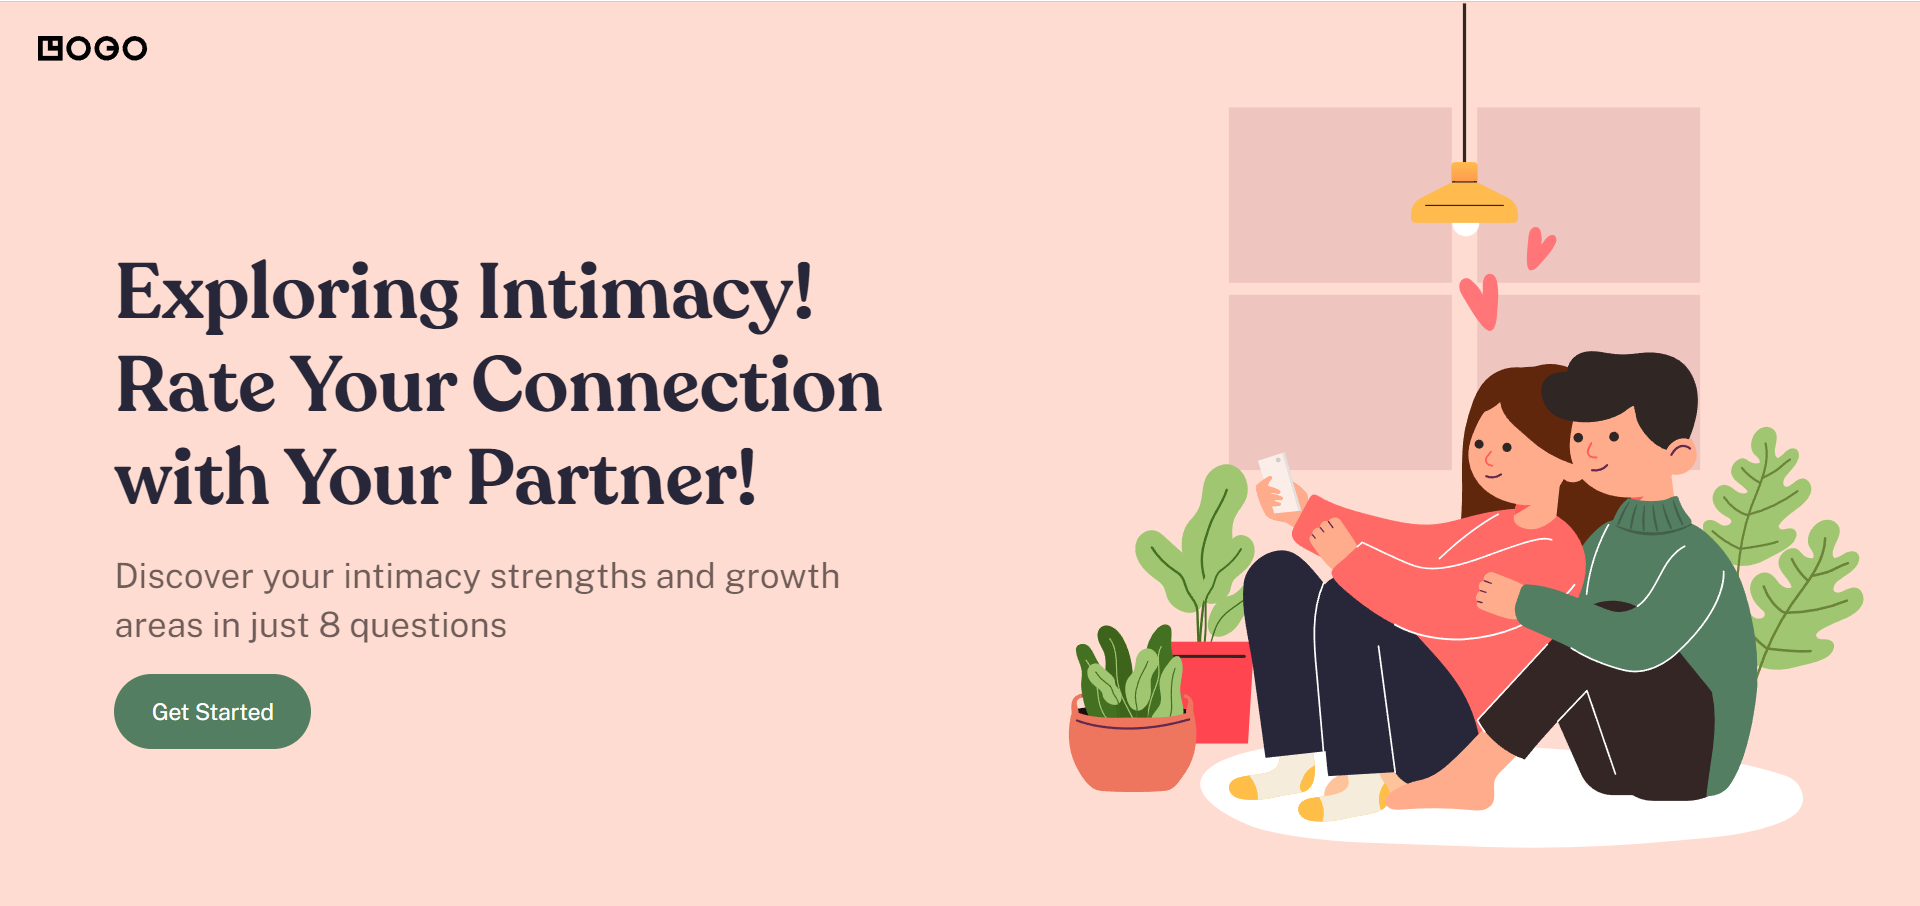  Rate Your Connection with Your Partner!